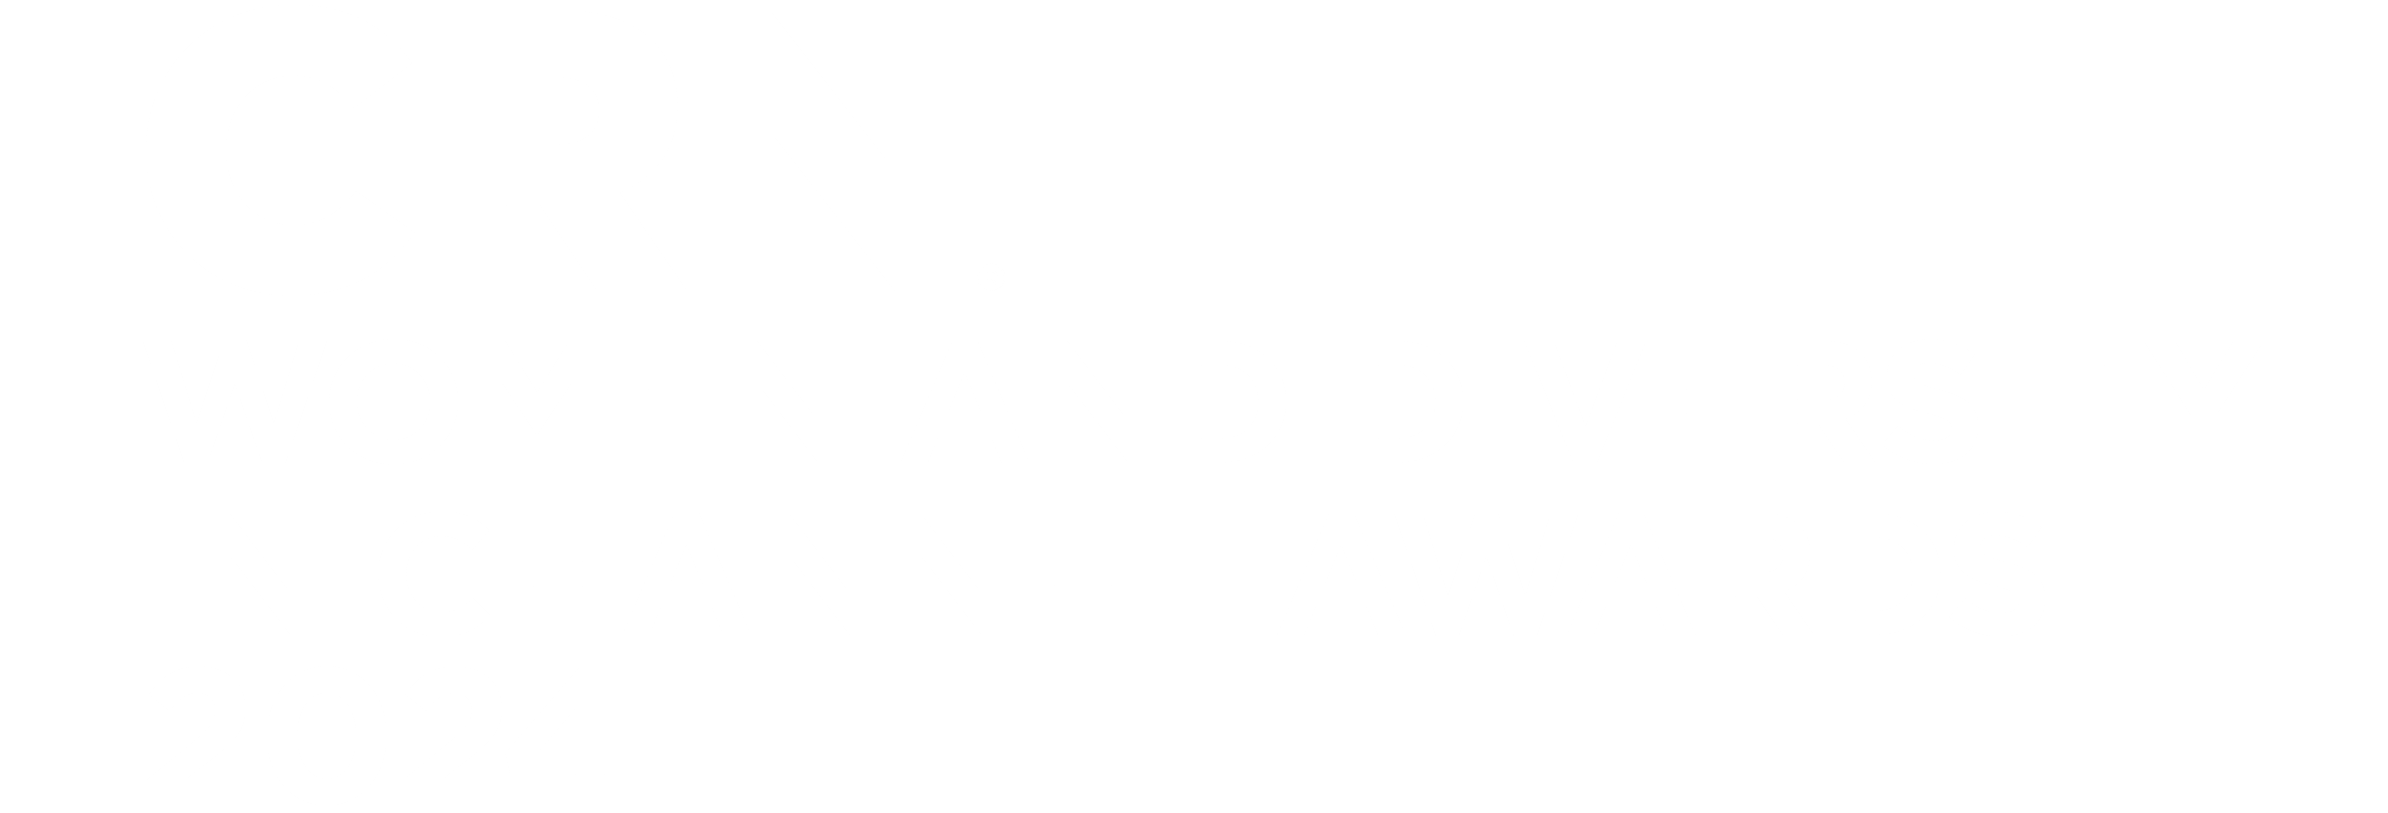 CRN Woman and Diversity Awards